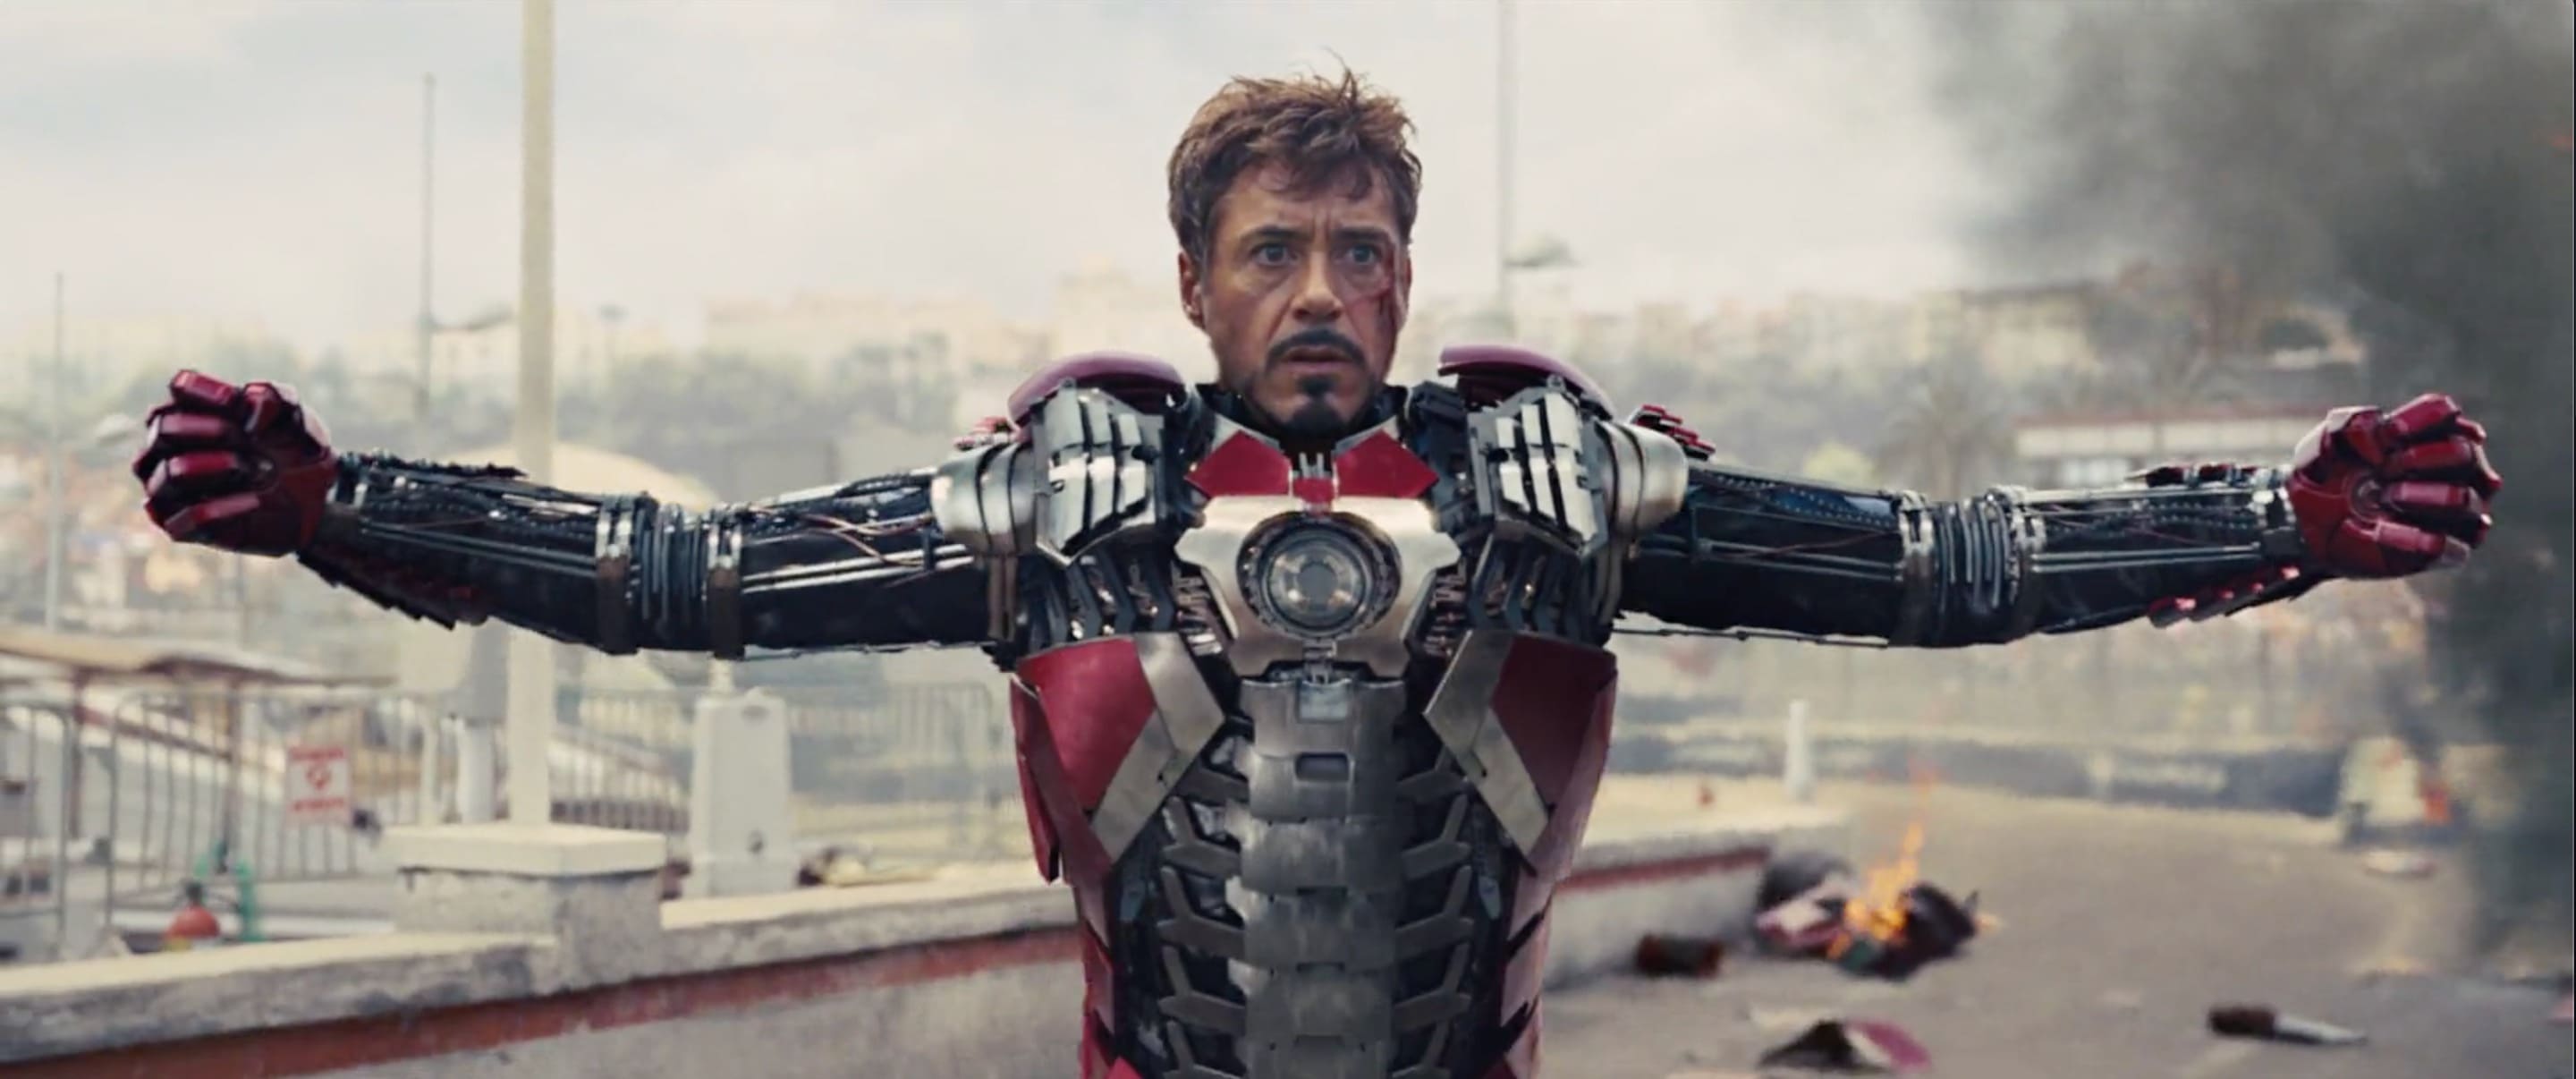 15 Iron Man Suits That Bring Your Memories Back, Mark V (Iron Man 2)